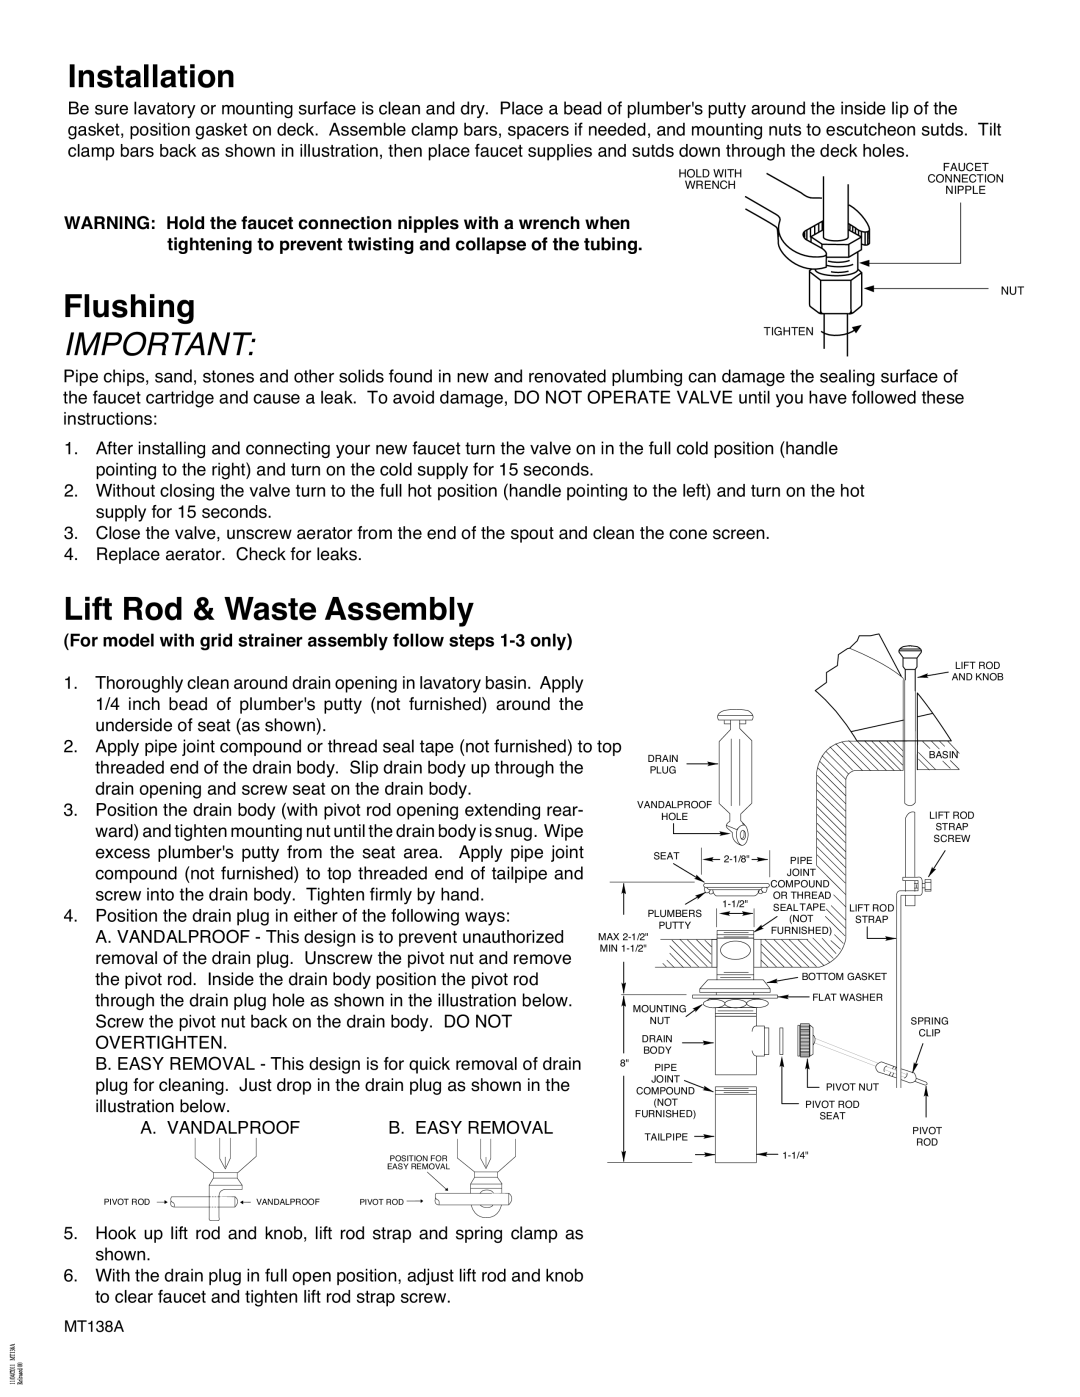 Moen 8455 Installation, Flushing, Lift Rod & Waste Assembly, For model with grid strainer assembly follow steps 1-3 only 